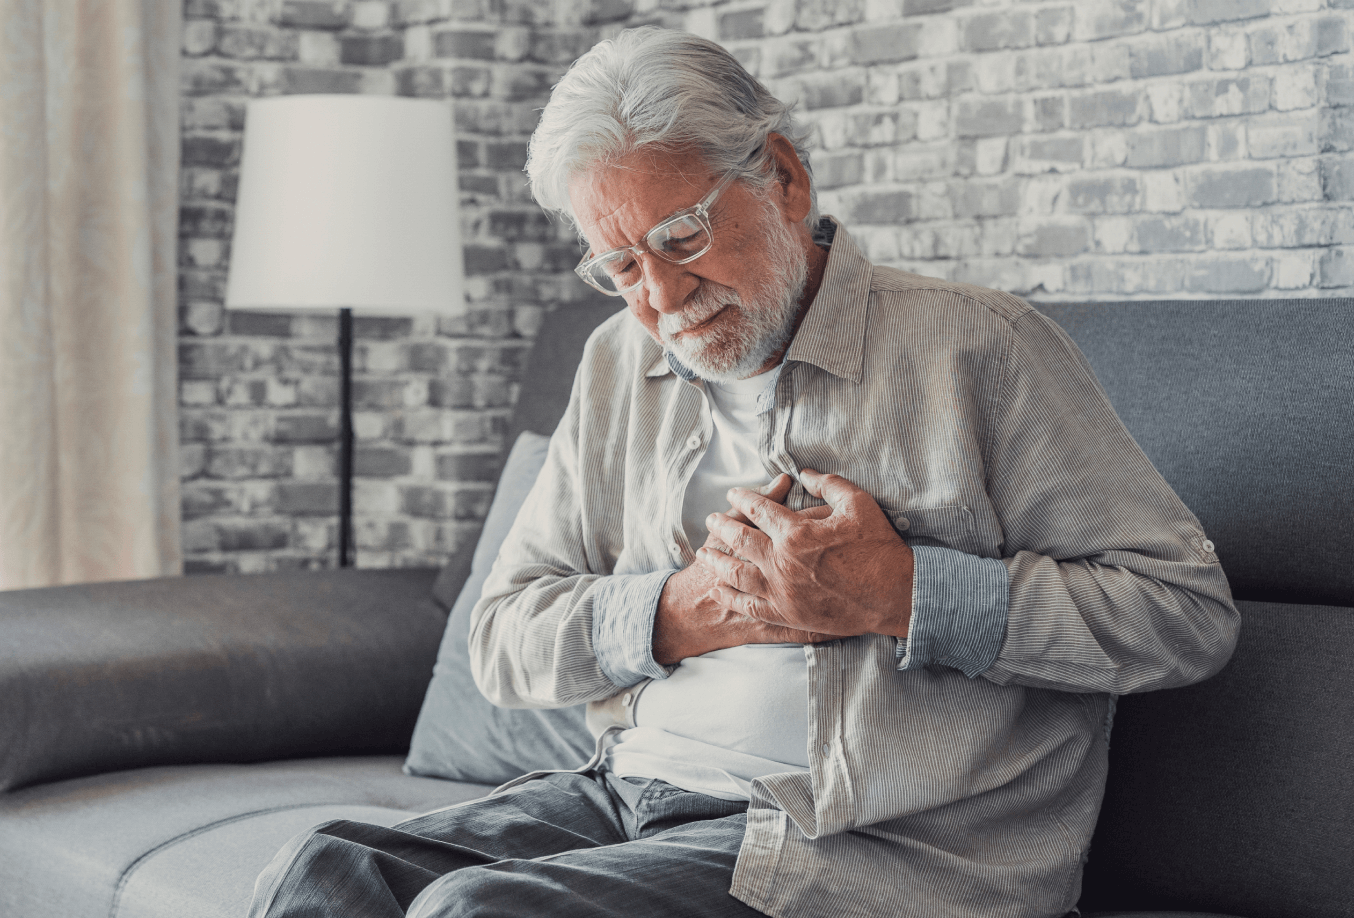 Elderly patient sitting on a couch holding his chest